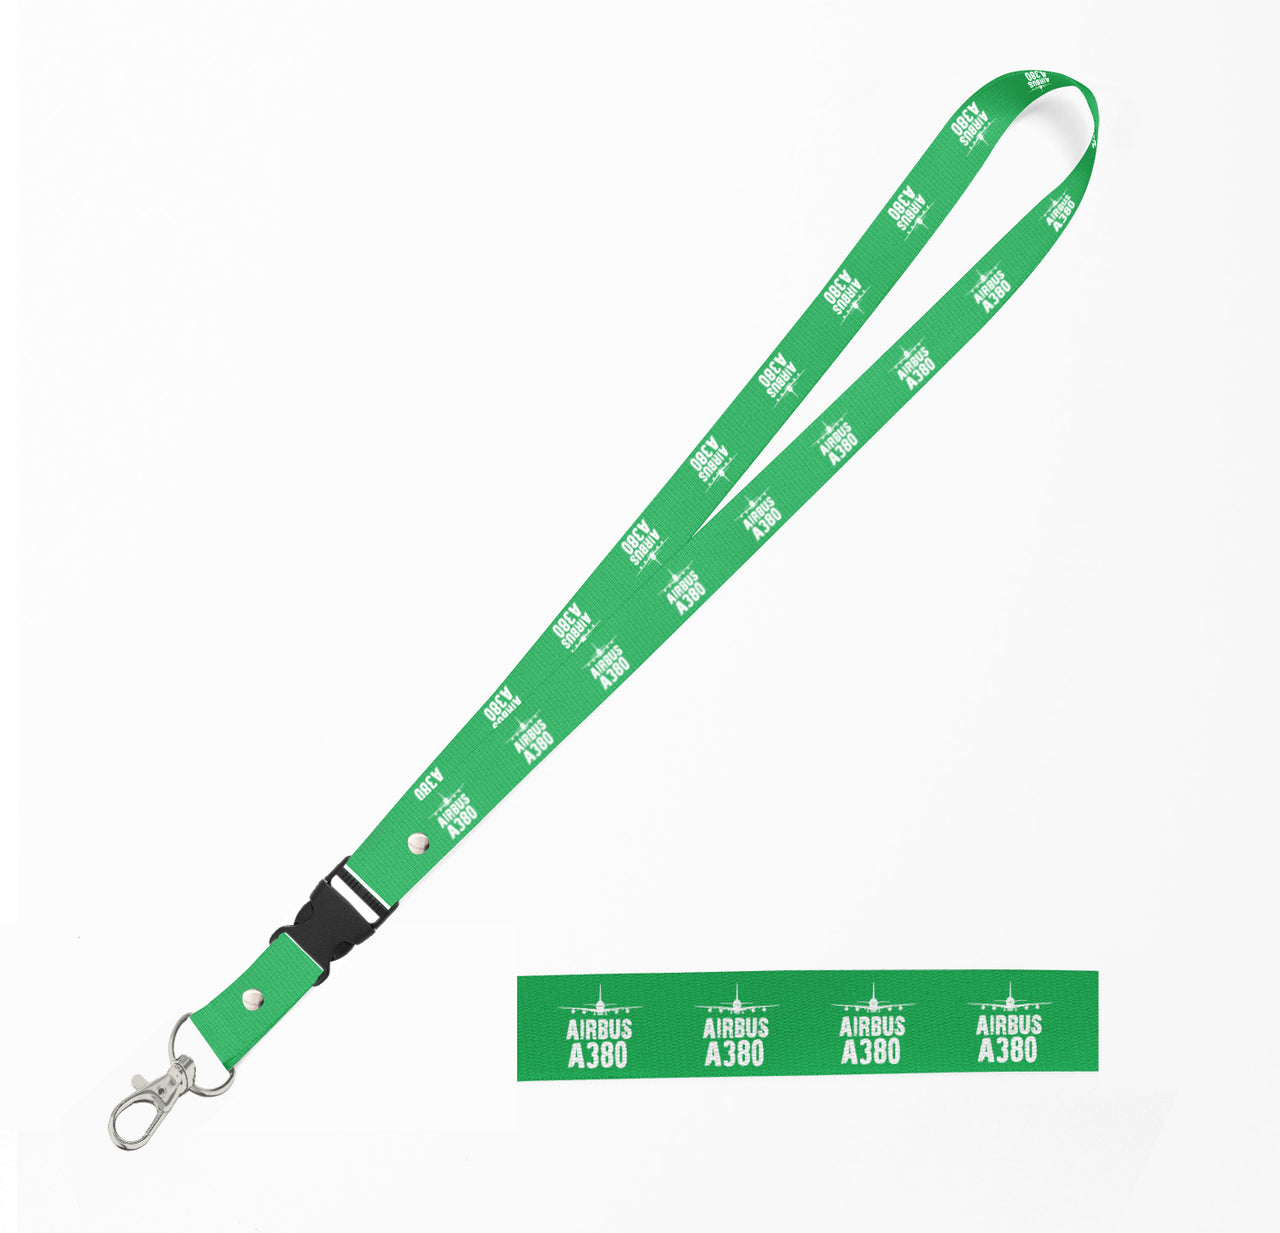 Airbus A380 & Plane Designed Detachable Lanyard & ID Holders